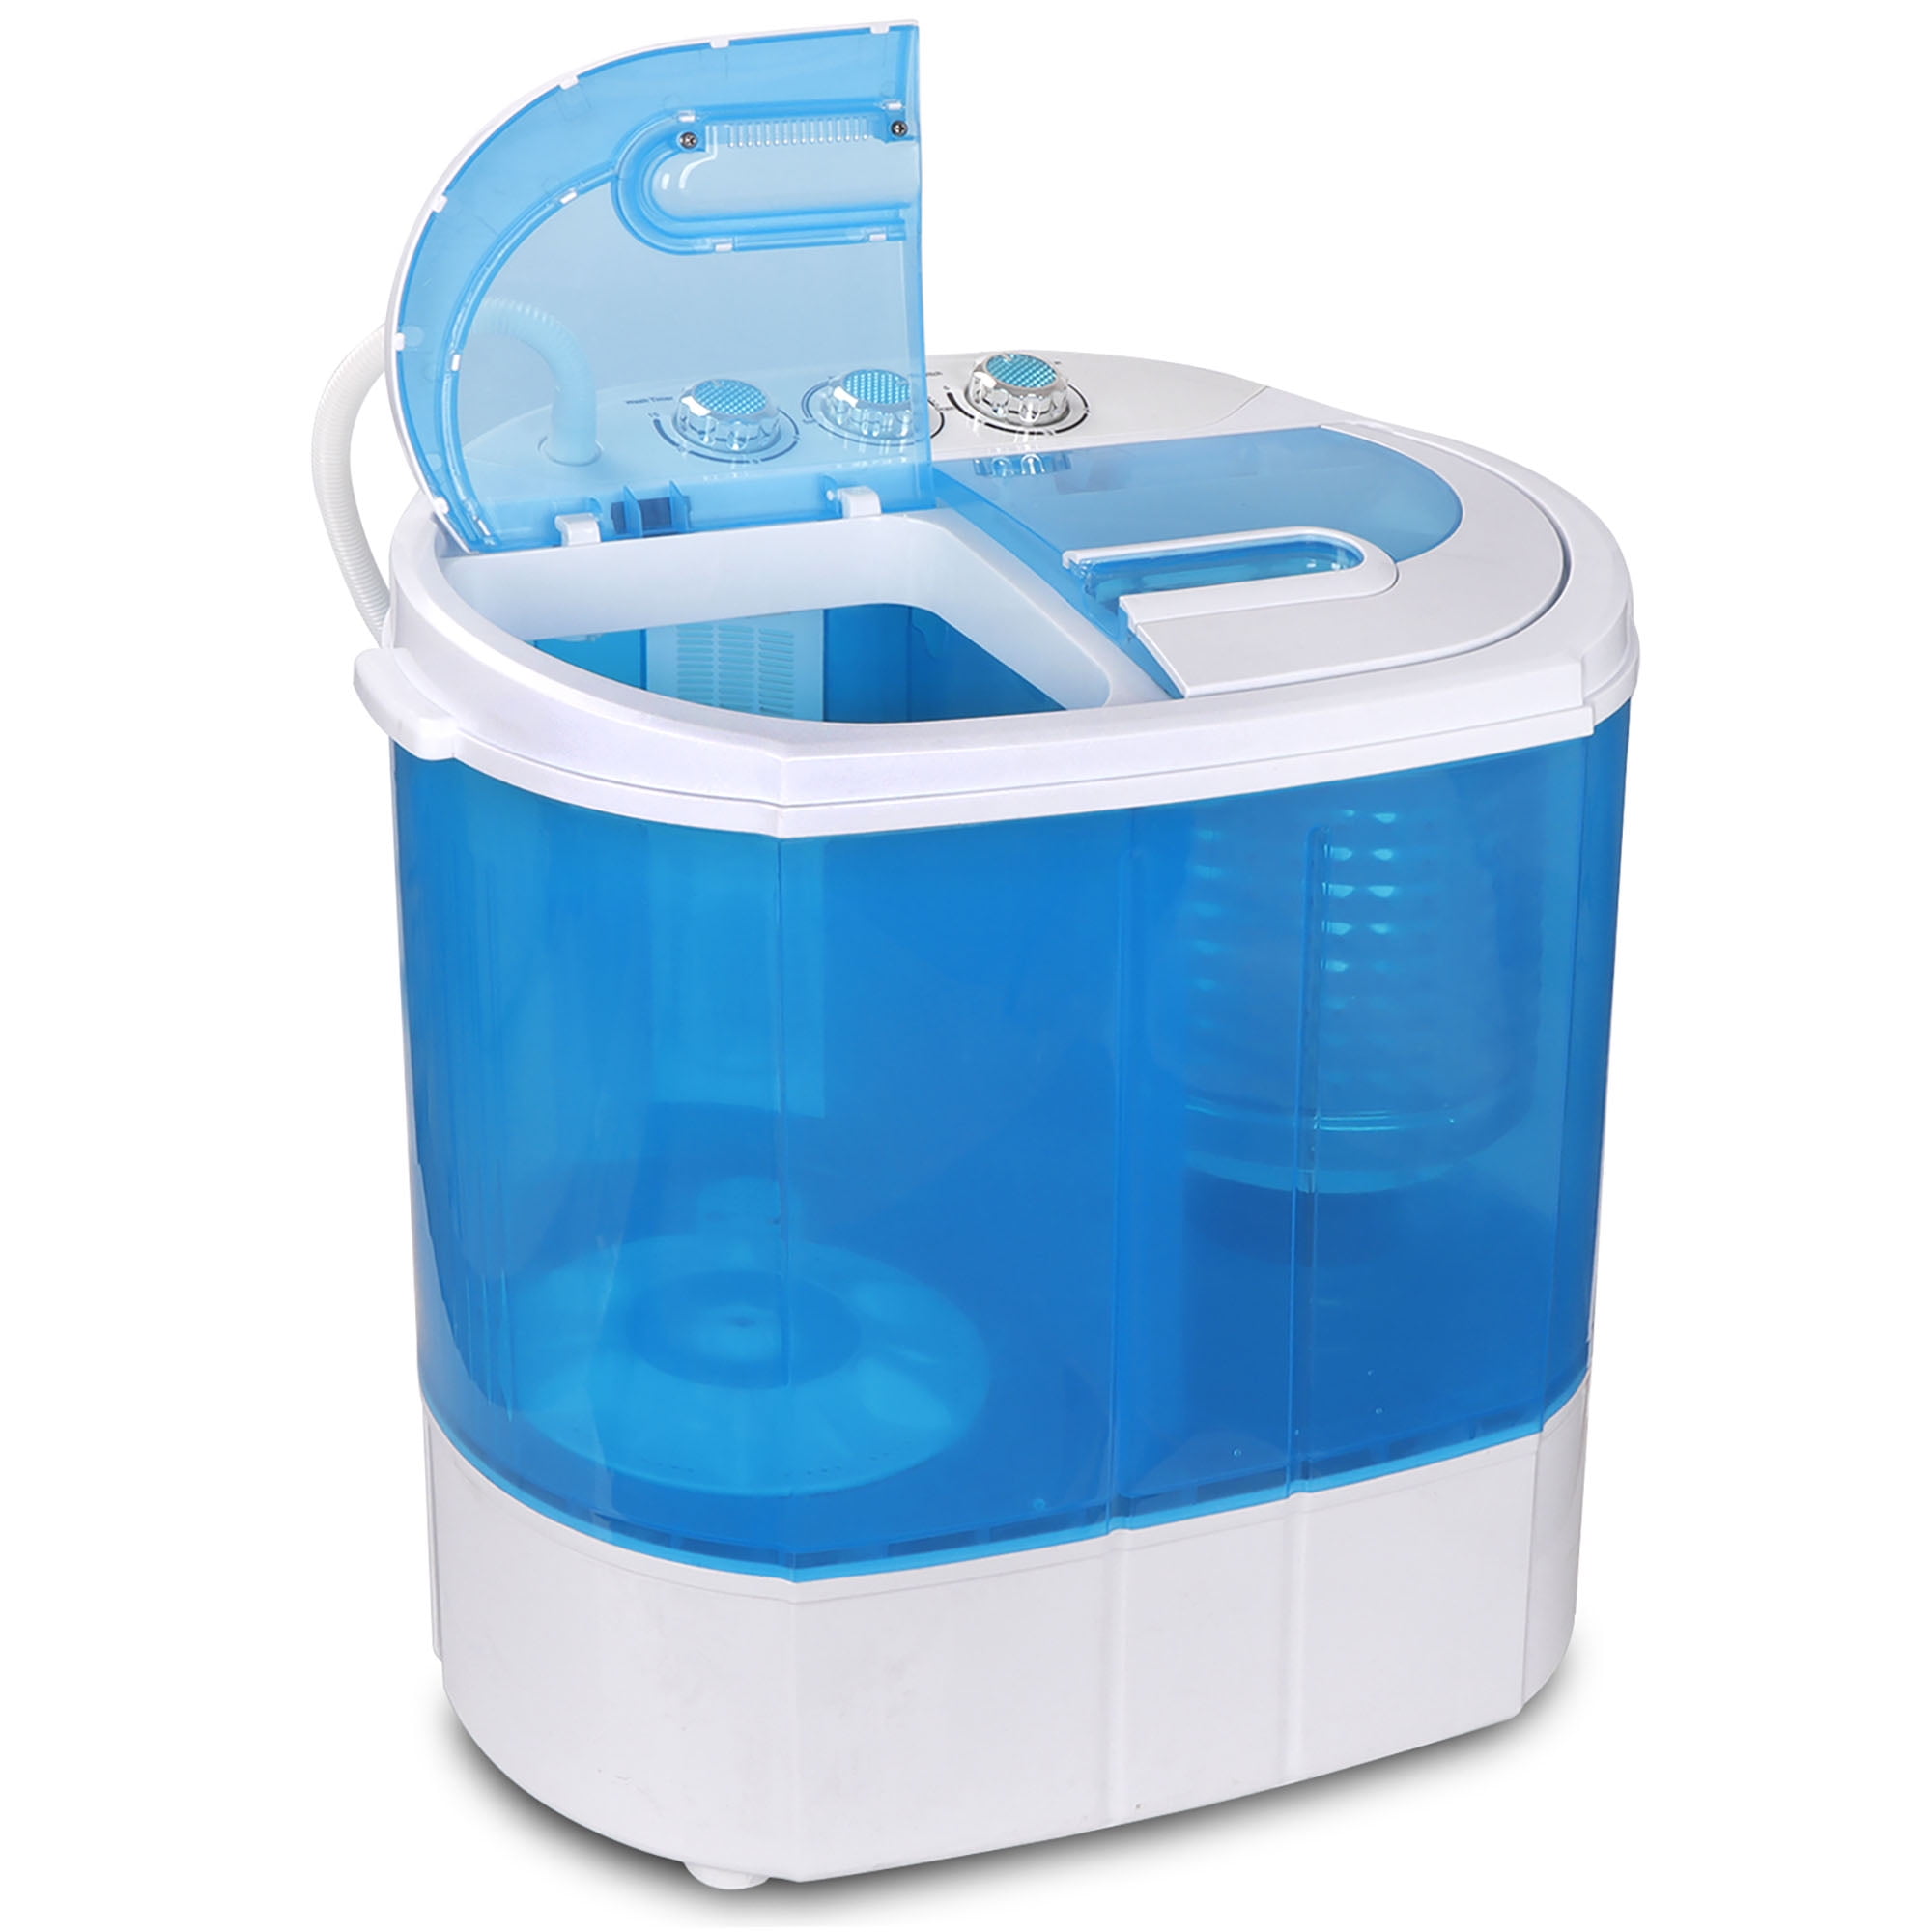 Portable 90-minute washer/dryer needs no water hoses